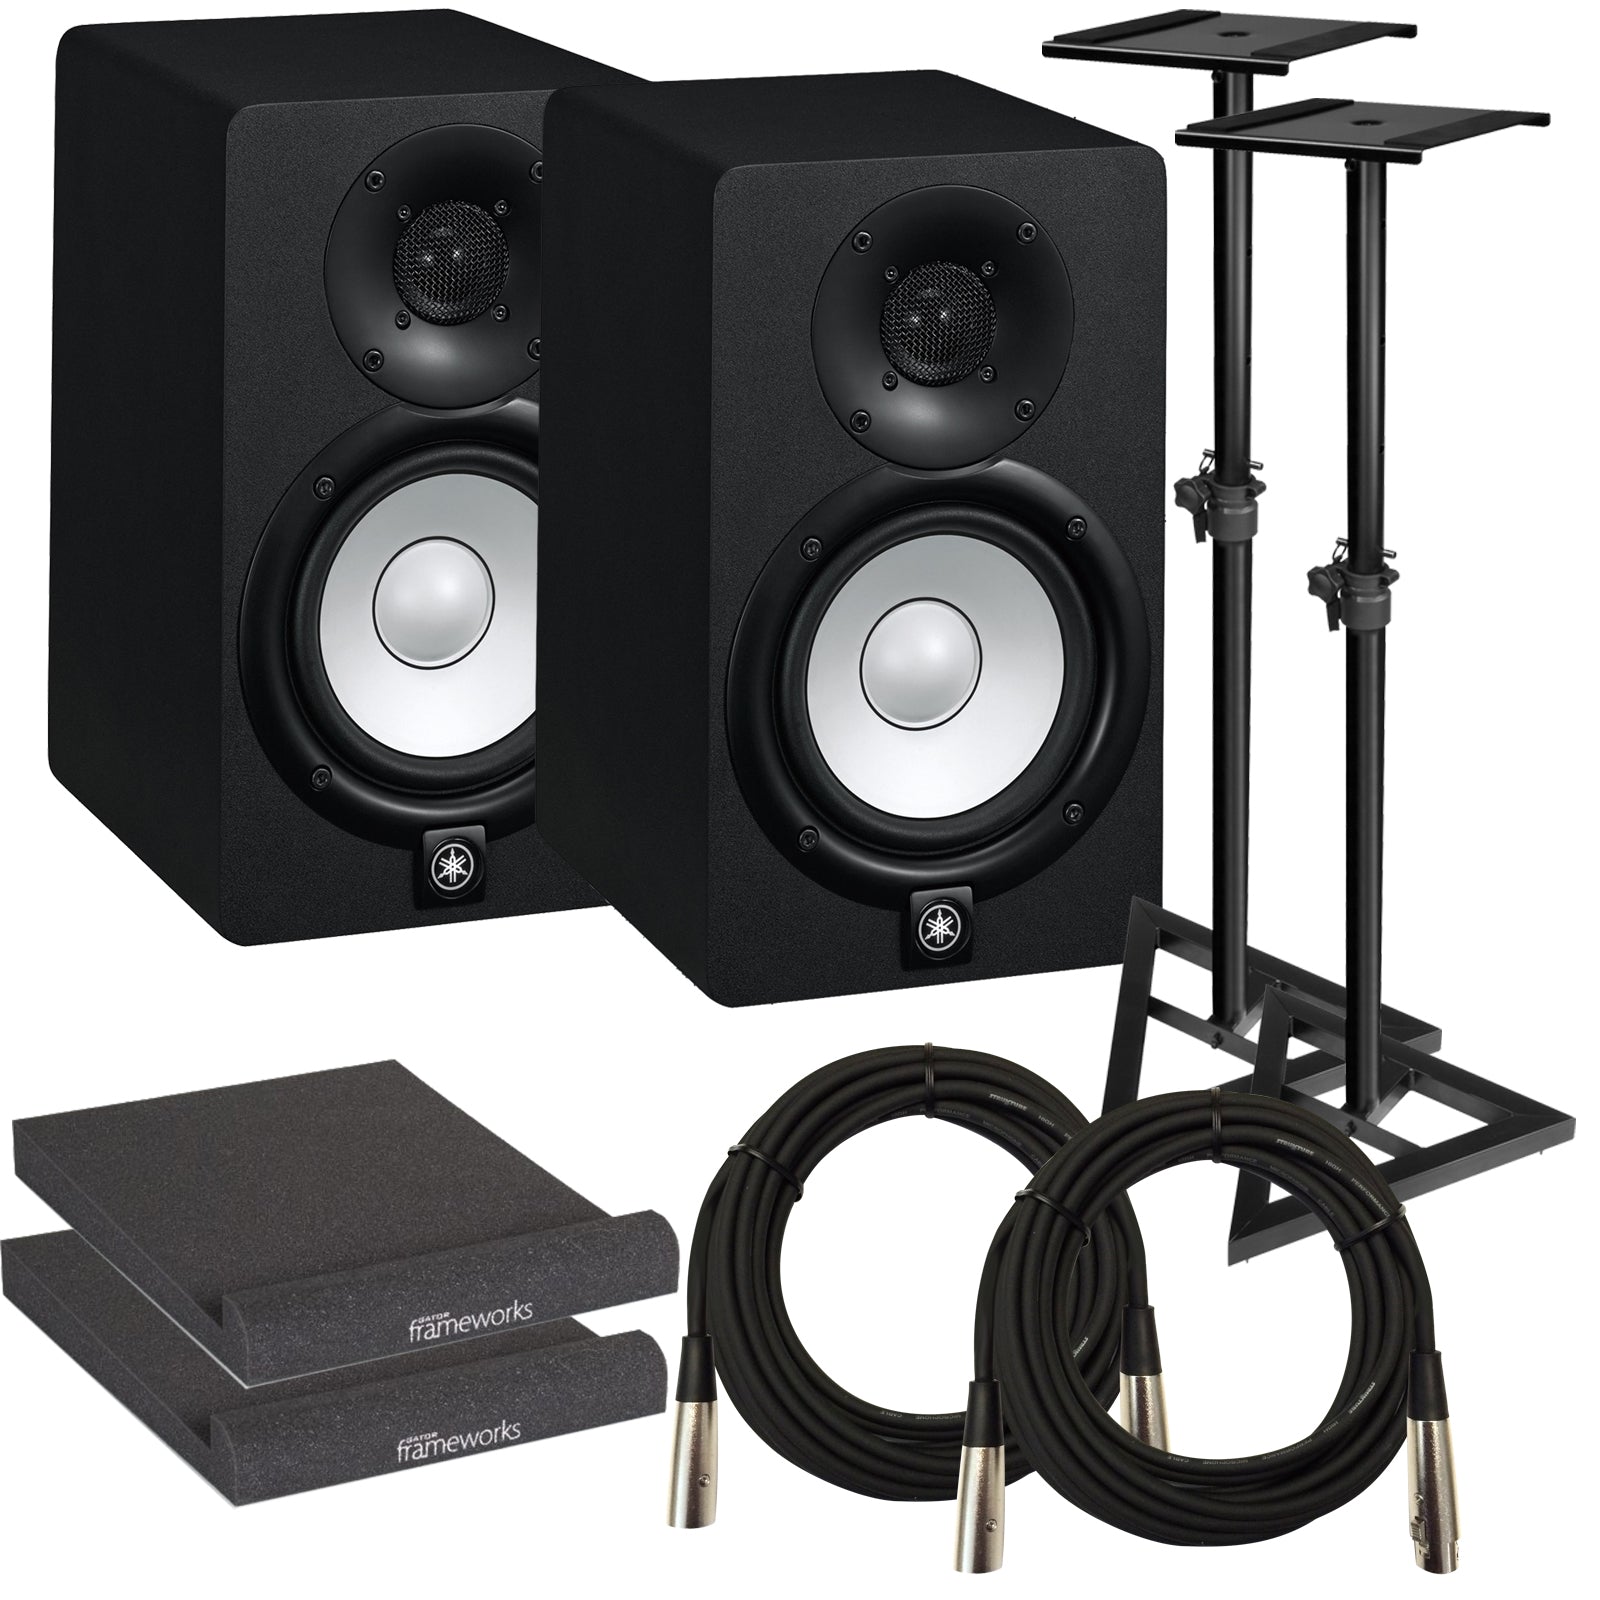 How NOISY are Yamaha HS5 Studio Monitors with Balanced Cables?